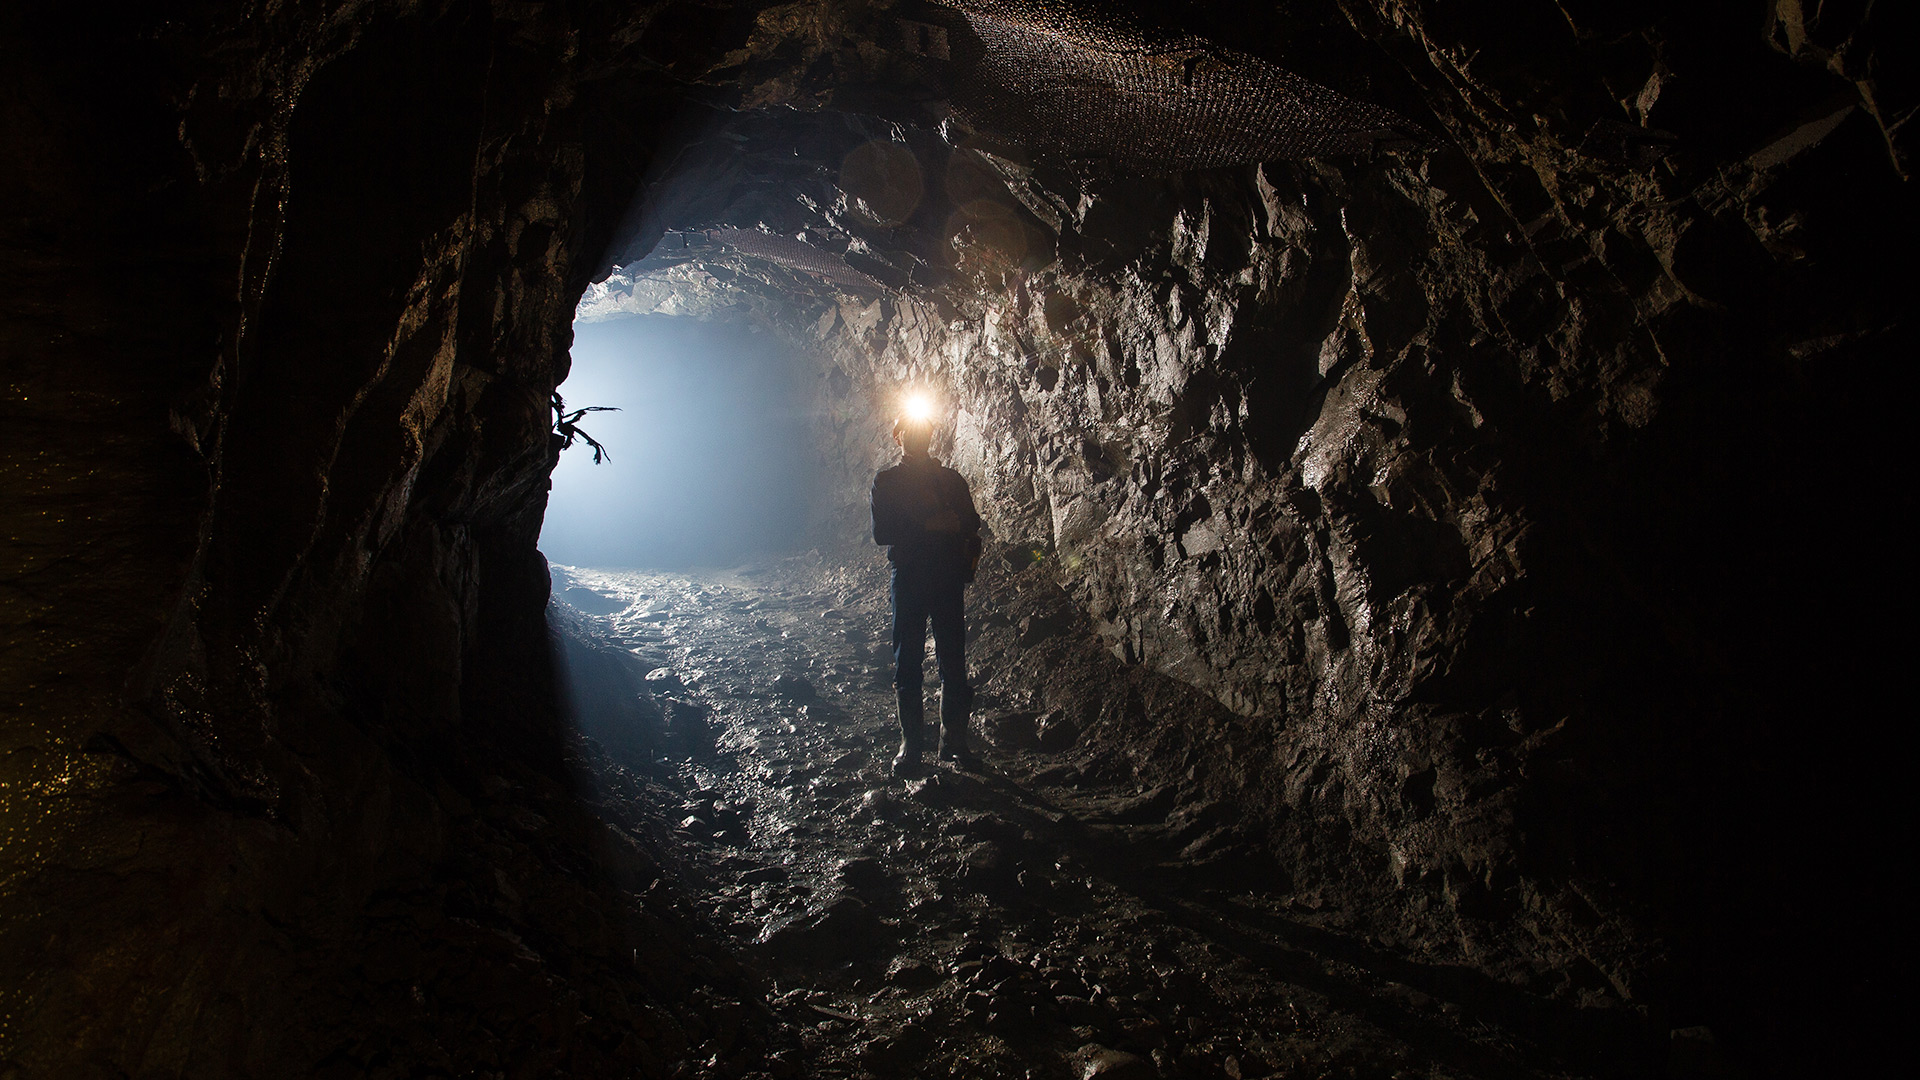 A miner standing in a mine tunnel with his headlight on